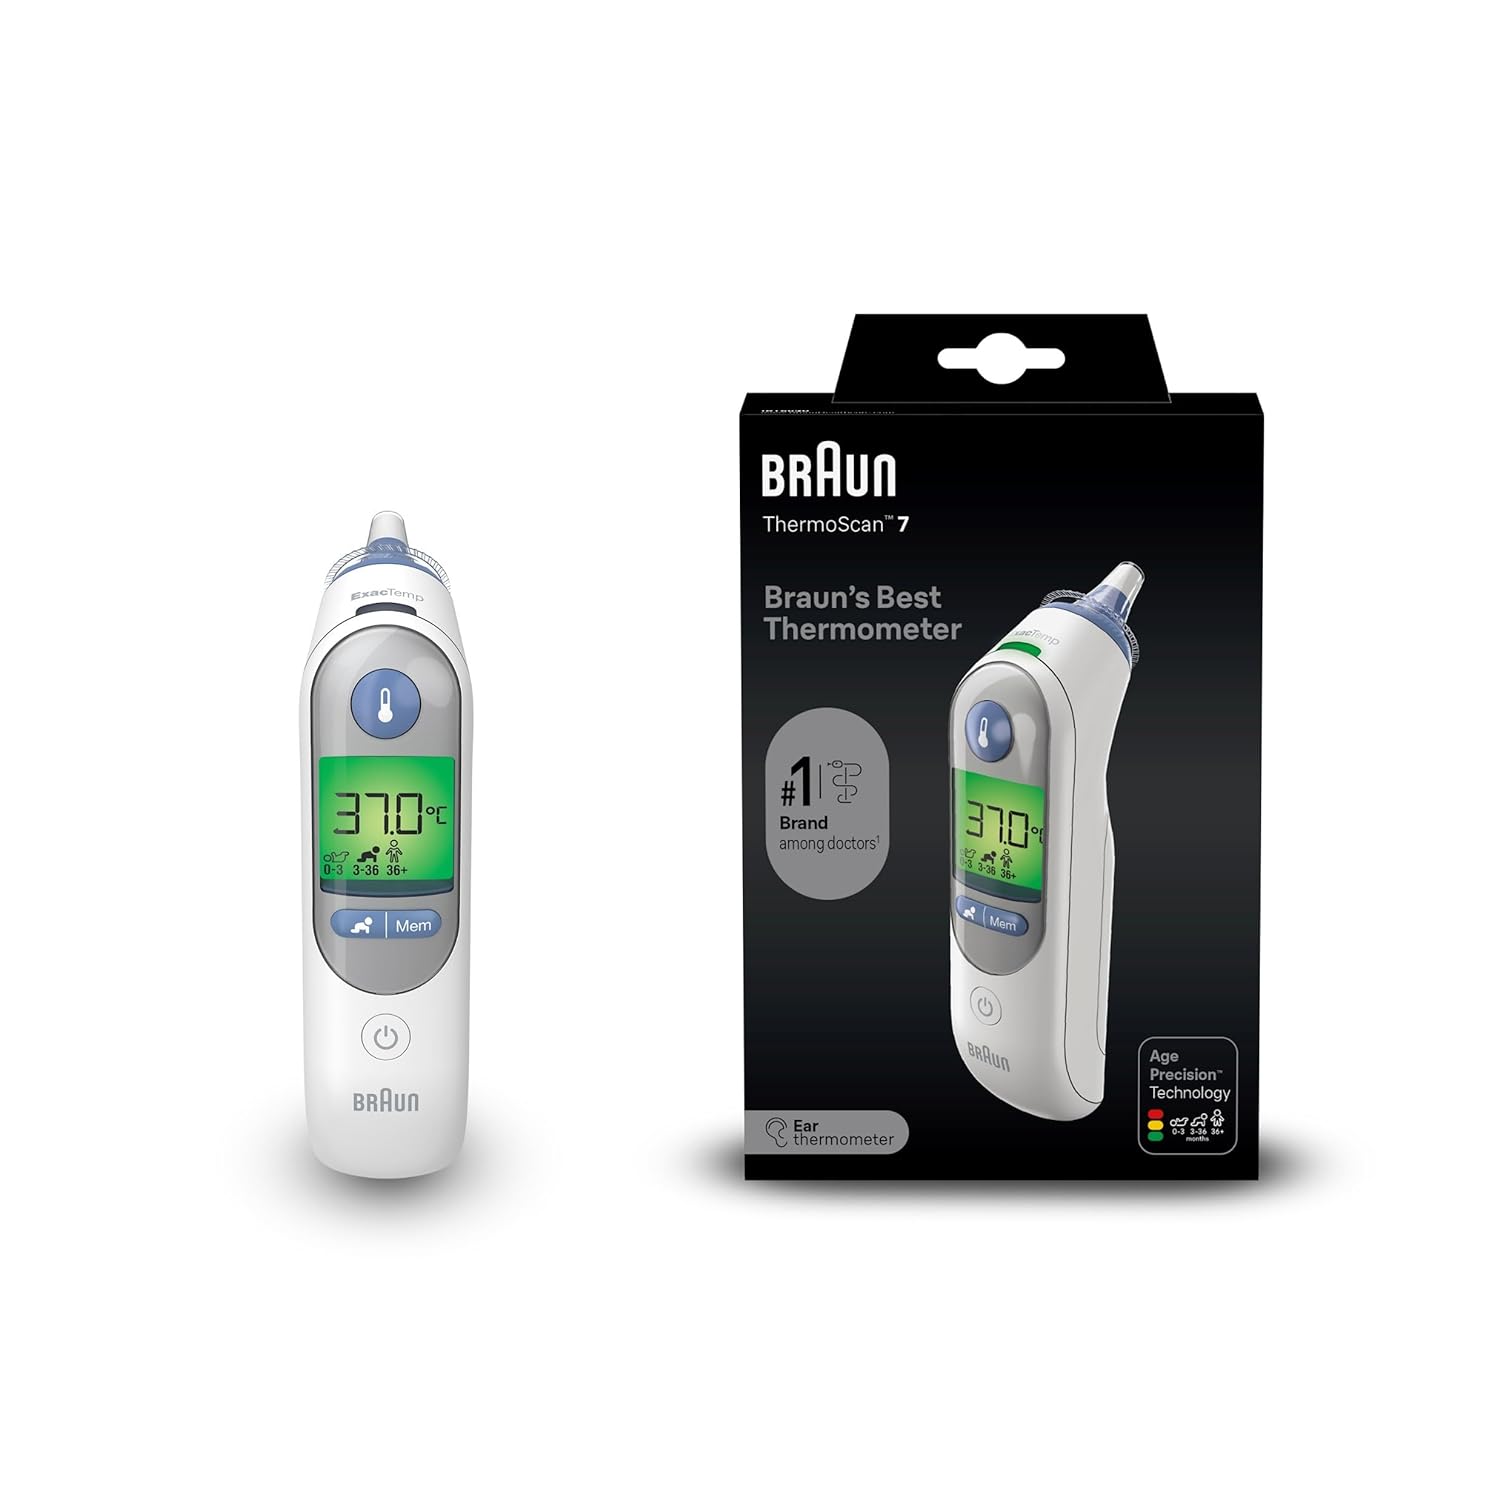 Braun Thermoscan 7 IRT6520 Digital Ear Thermometer with 21 disposable probe covers